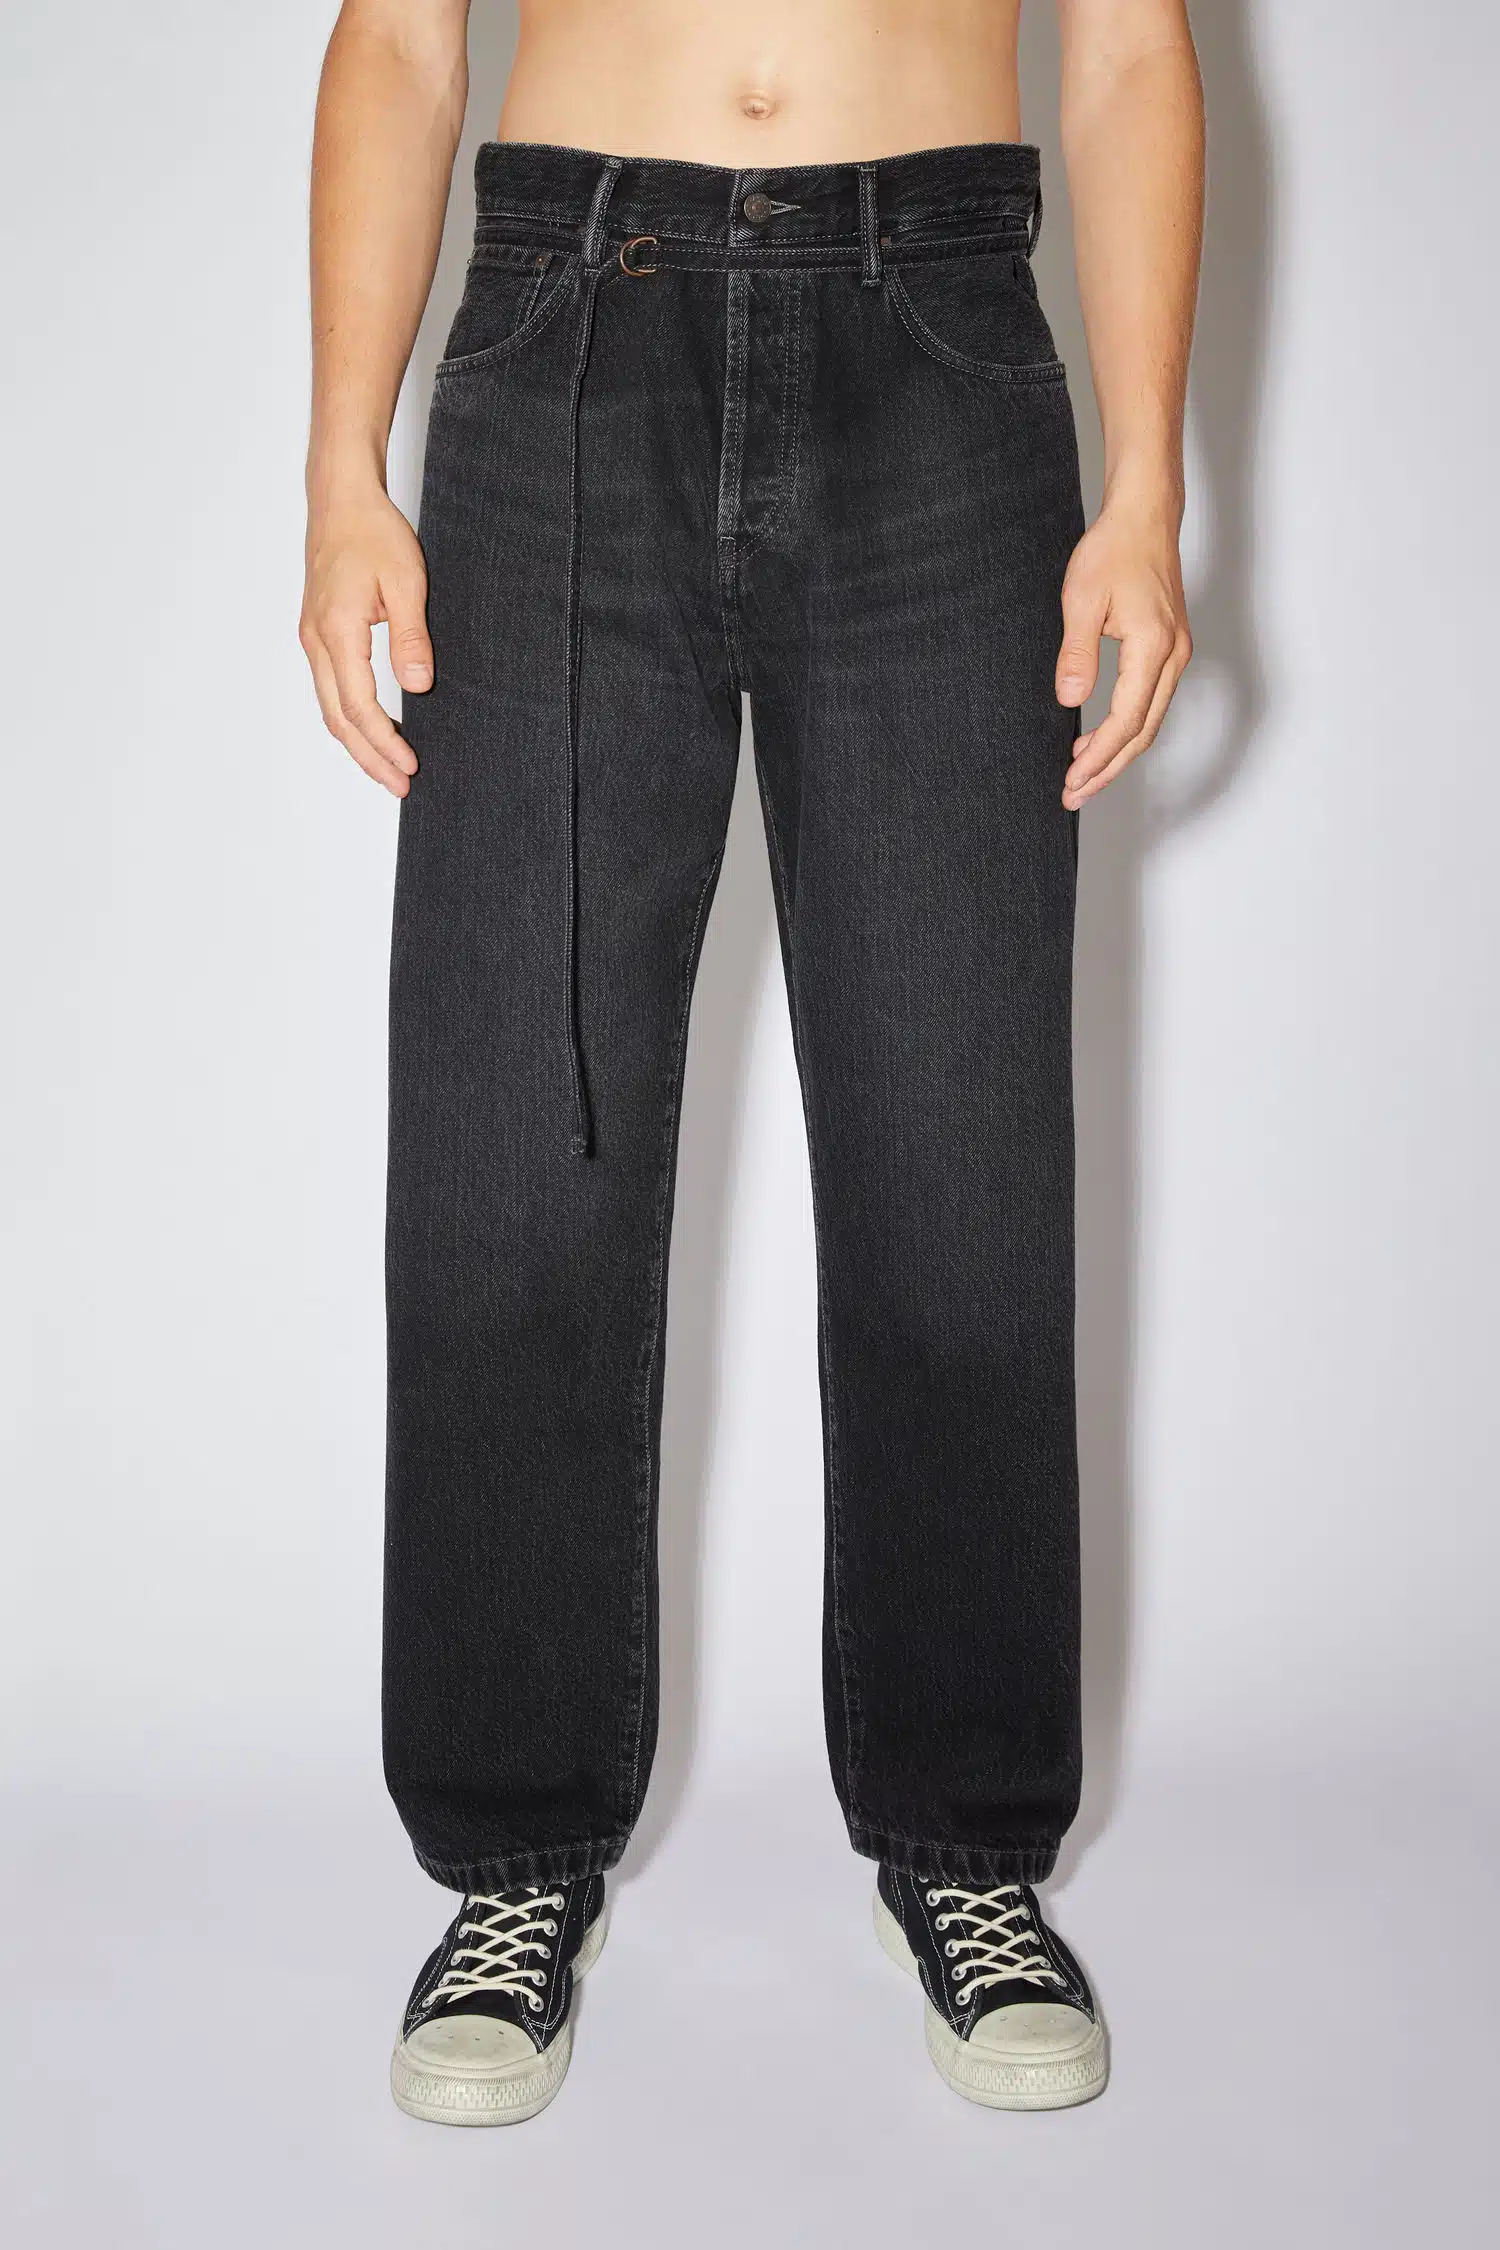 Review Acne Studios Oversized jeans